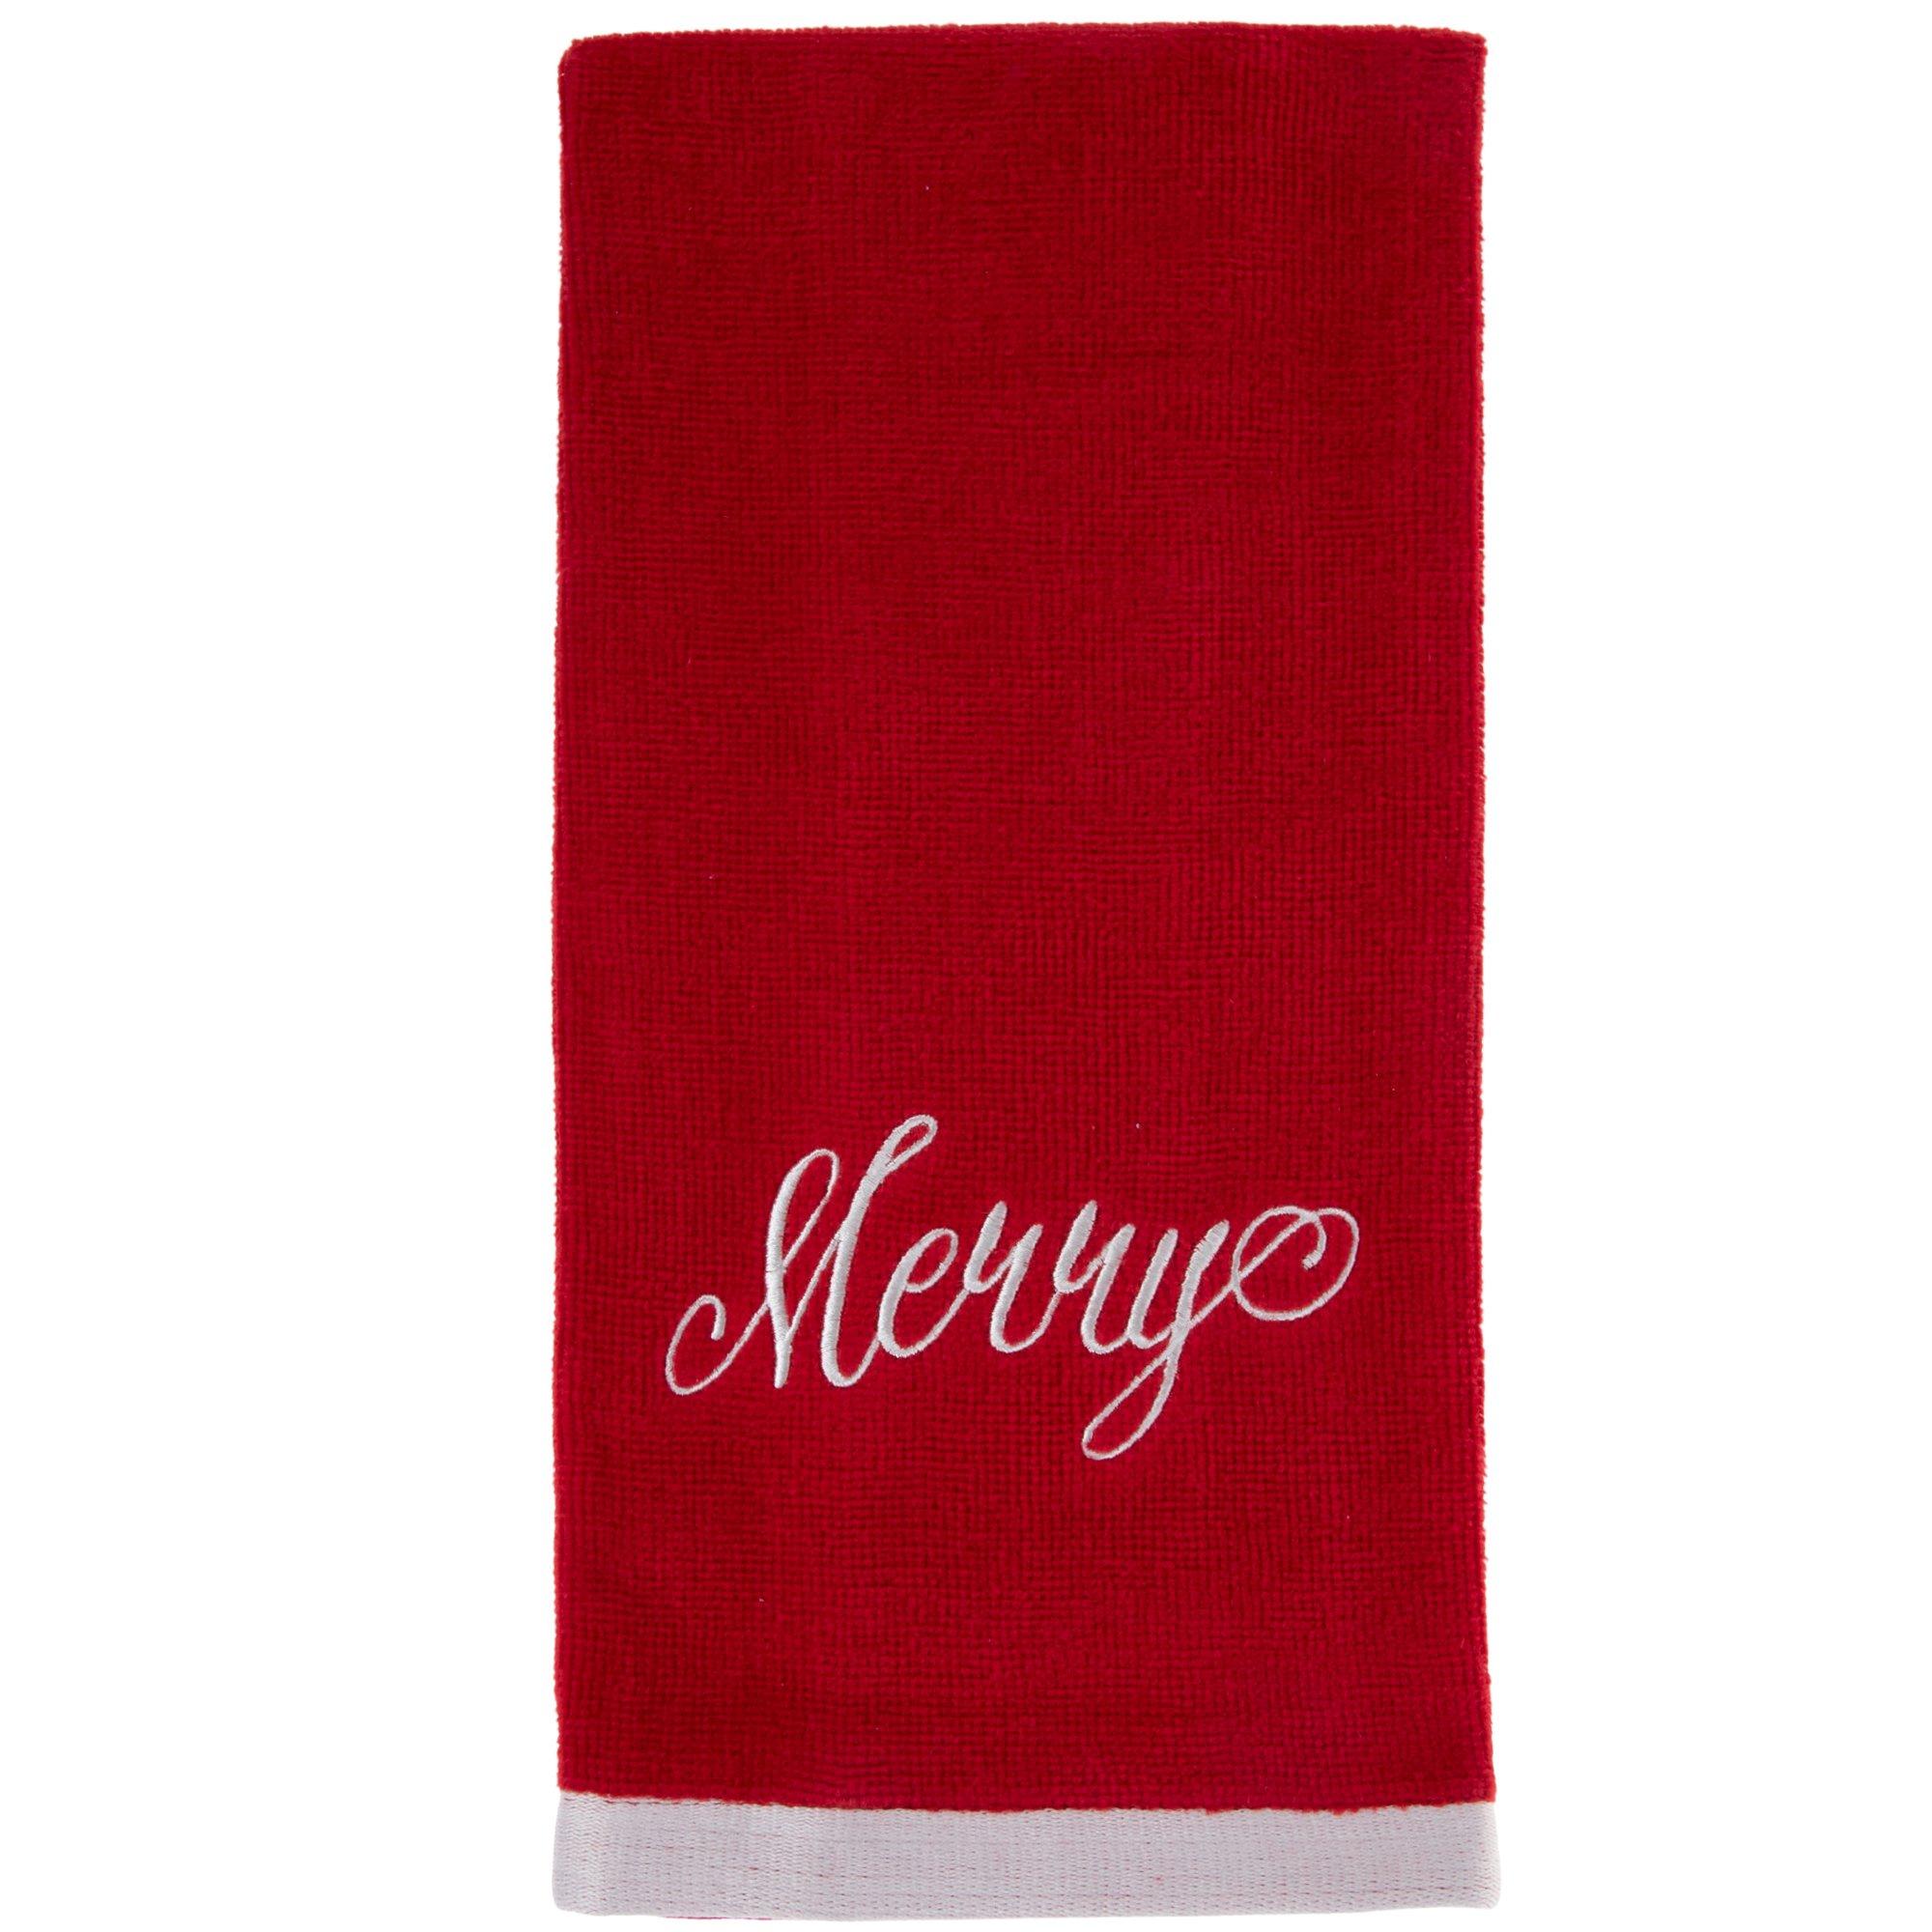 Round hand towels embroidered cherry, kitchen towels, red fruits